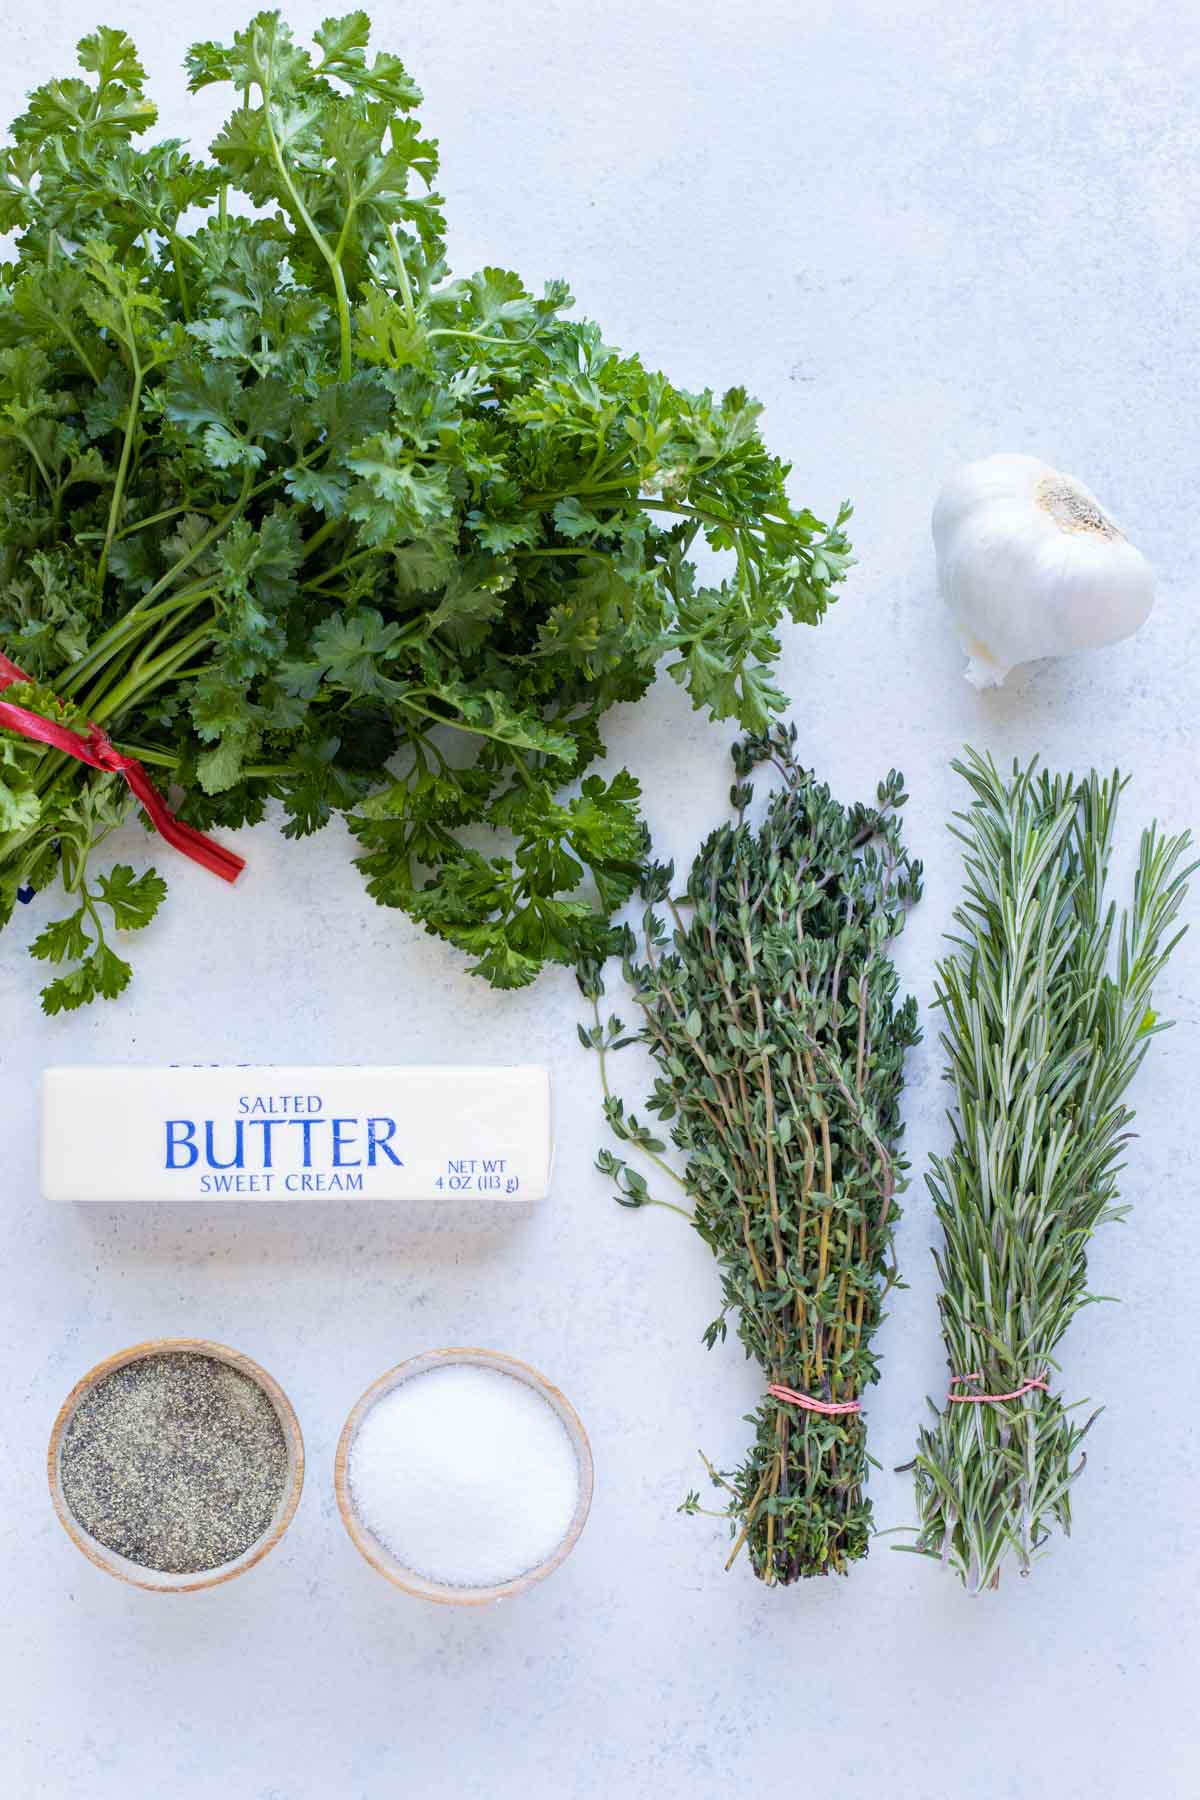 Butter, rosemary, thyme, parsley, garlic, salt, and pepper are the ingredients for this recipe.